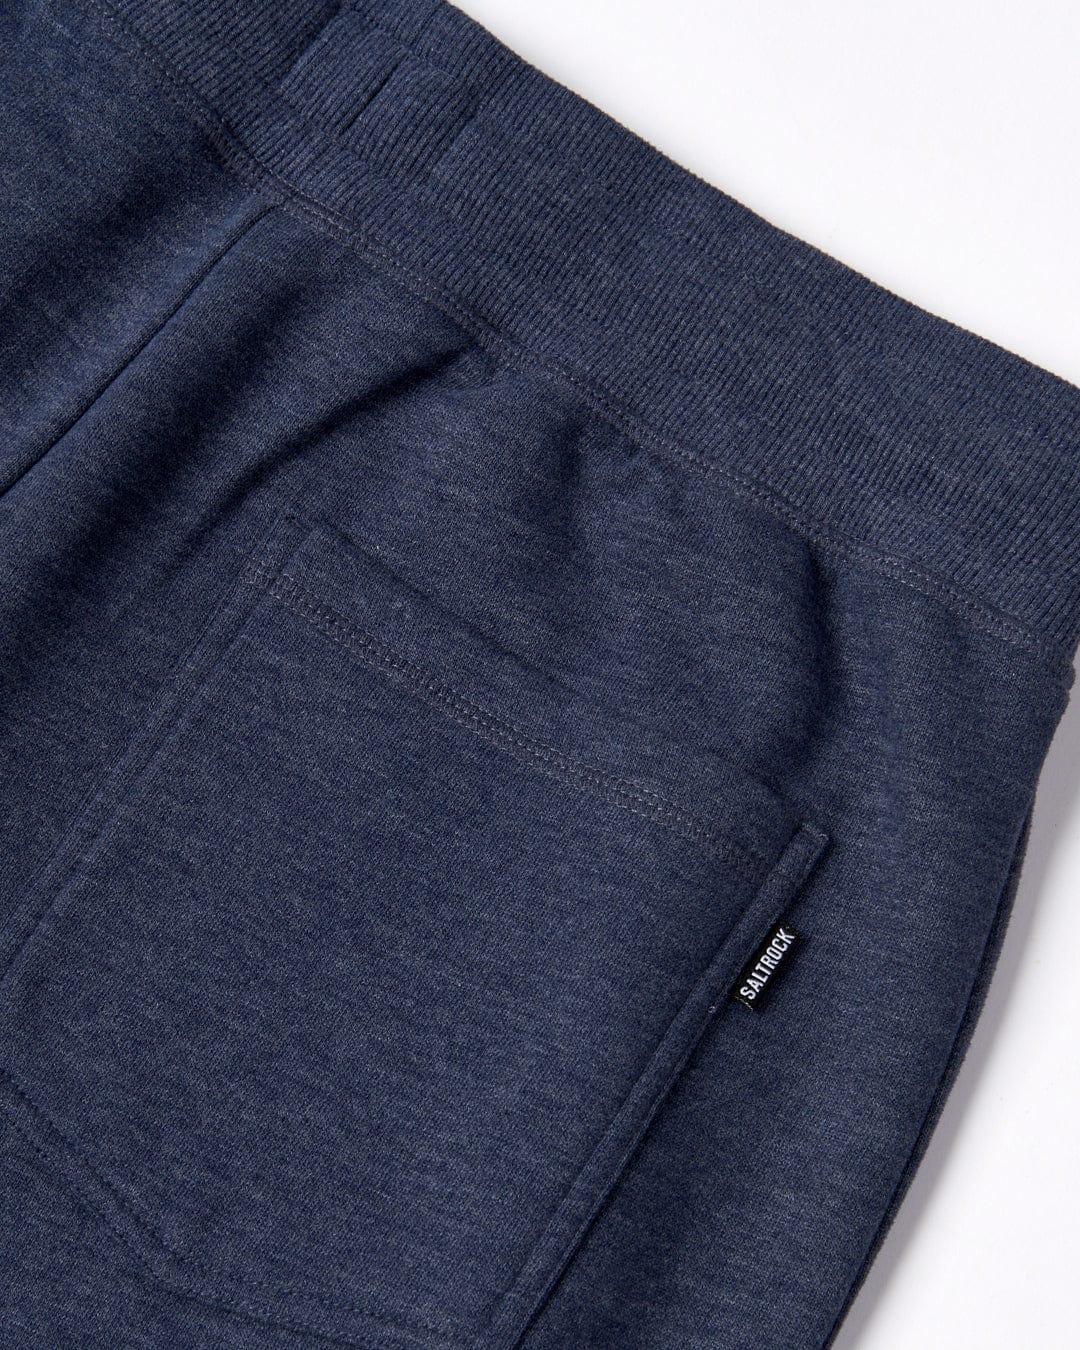 Close-up of a navy blue Velator joggers with an elasticated waistband, cuffed ankles, and a small label featuring Saltrock branding.